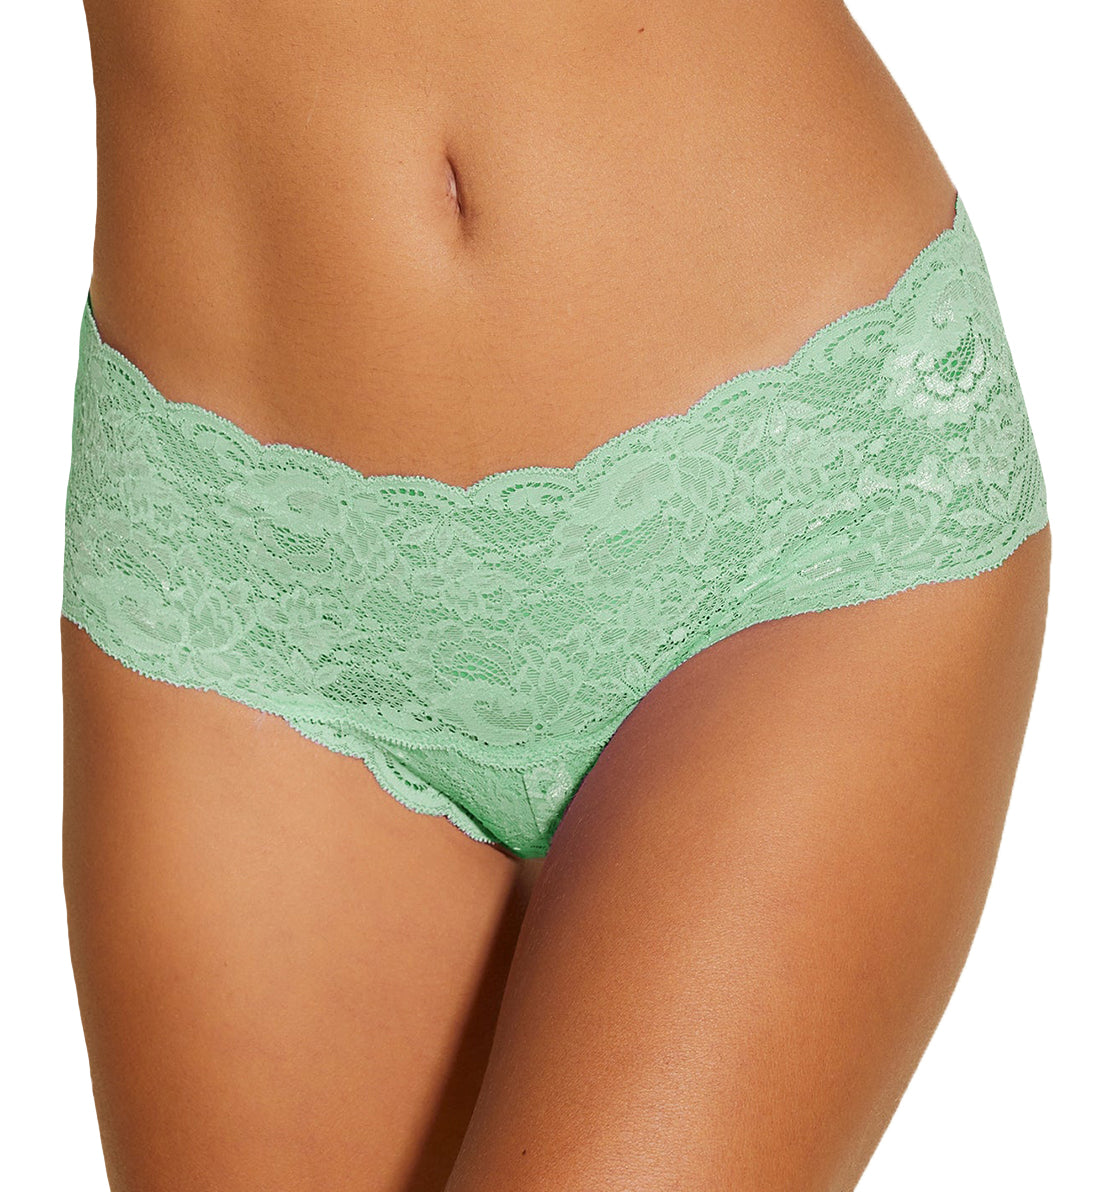 Cosabella Never Say Never Hottie Lowrider Hotpant (NEVER07ZL),M/L,Ghana Green - Ghana Green,M/L